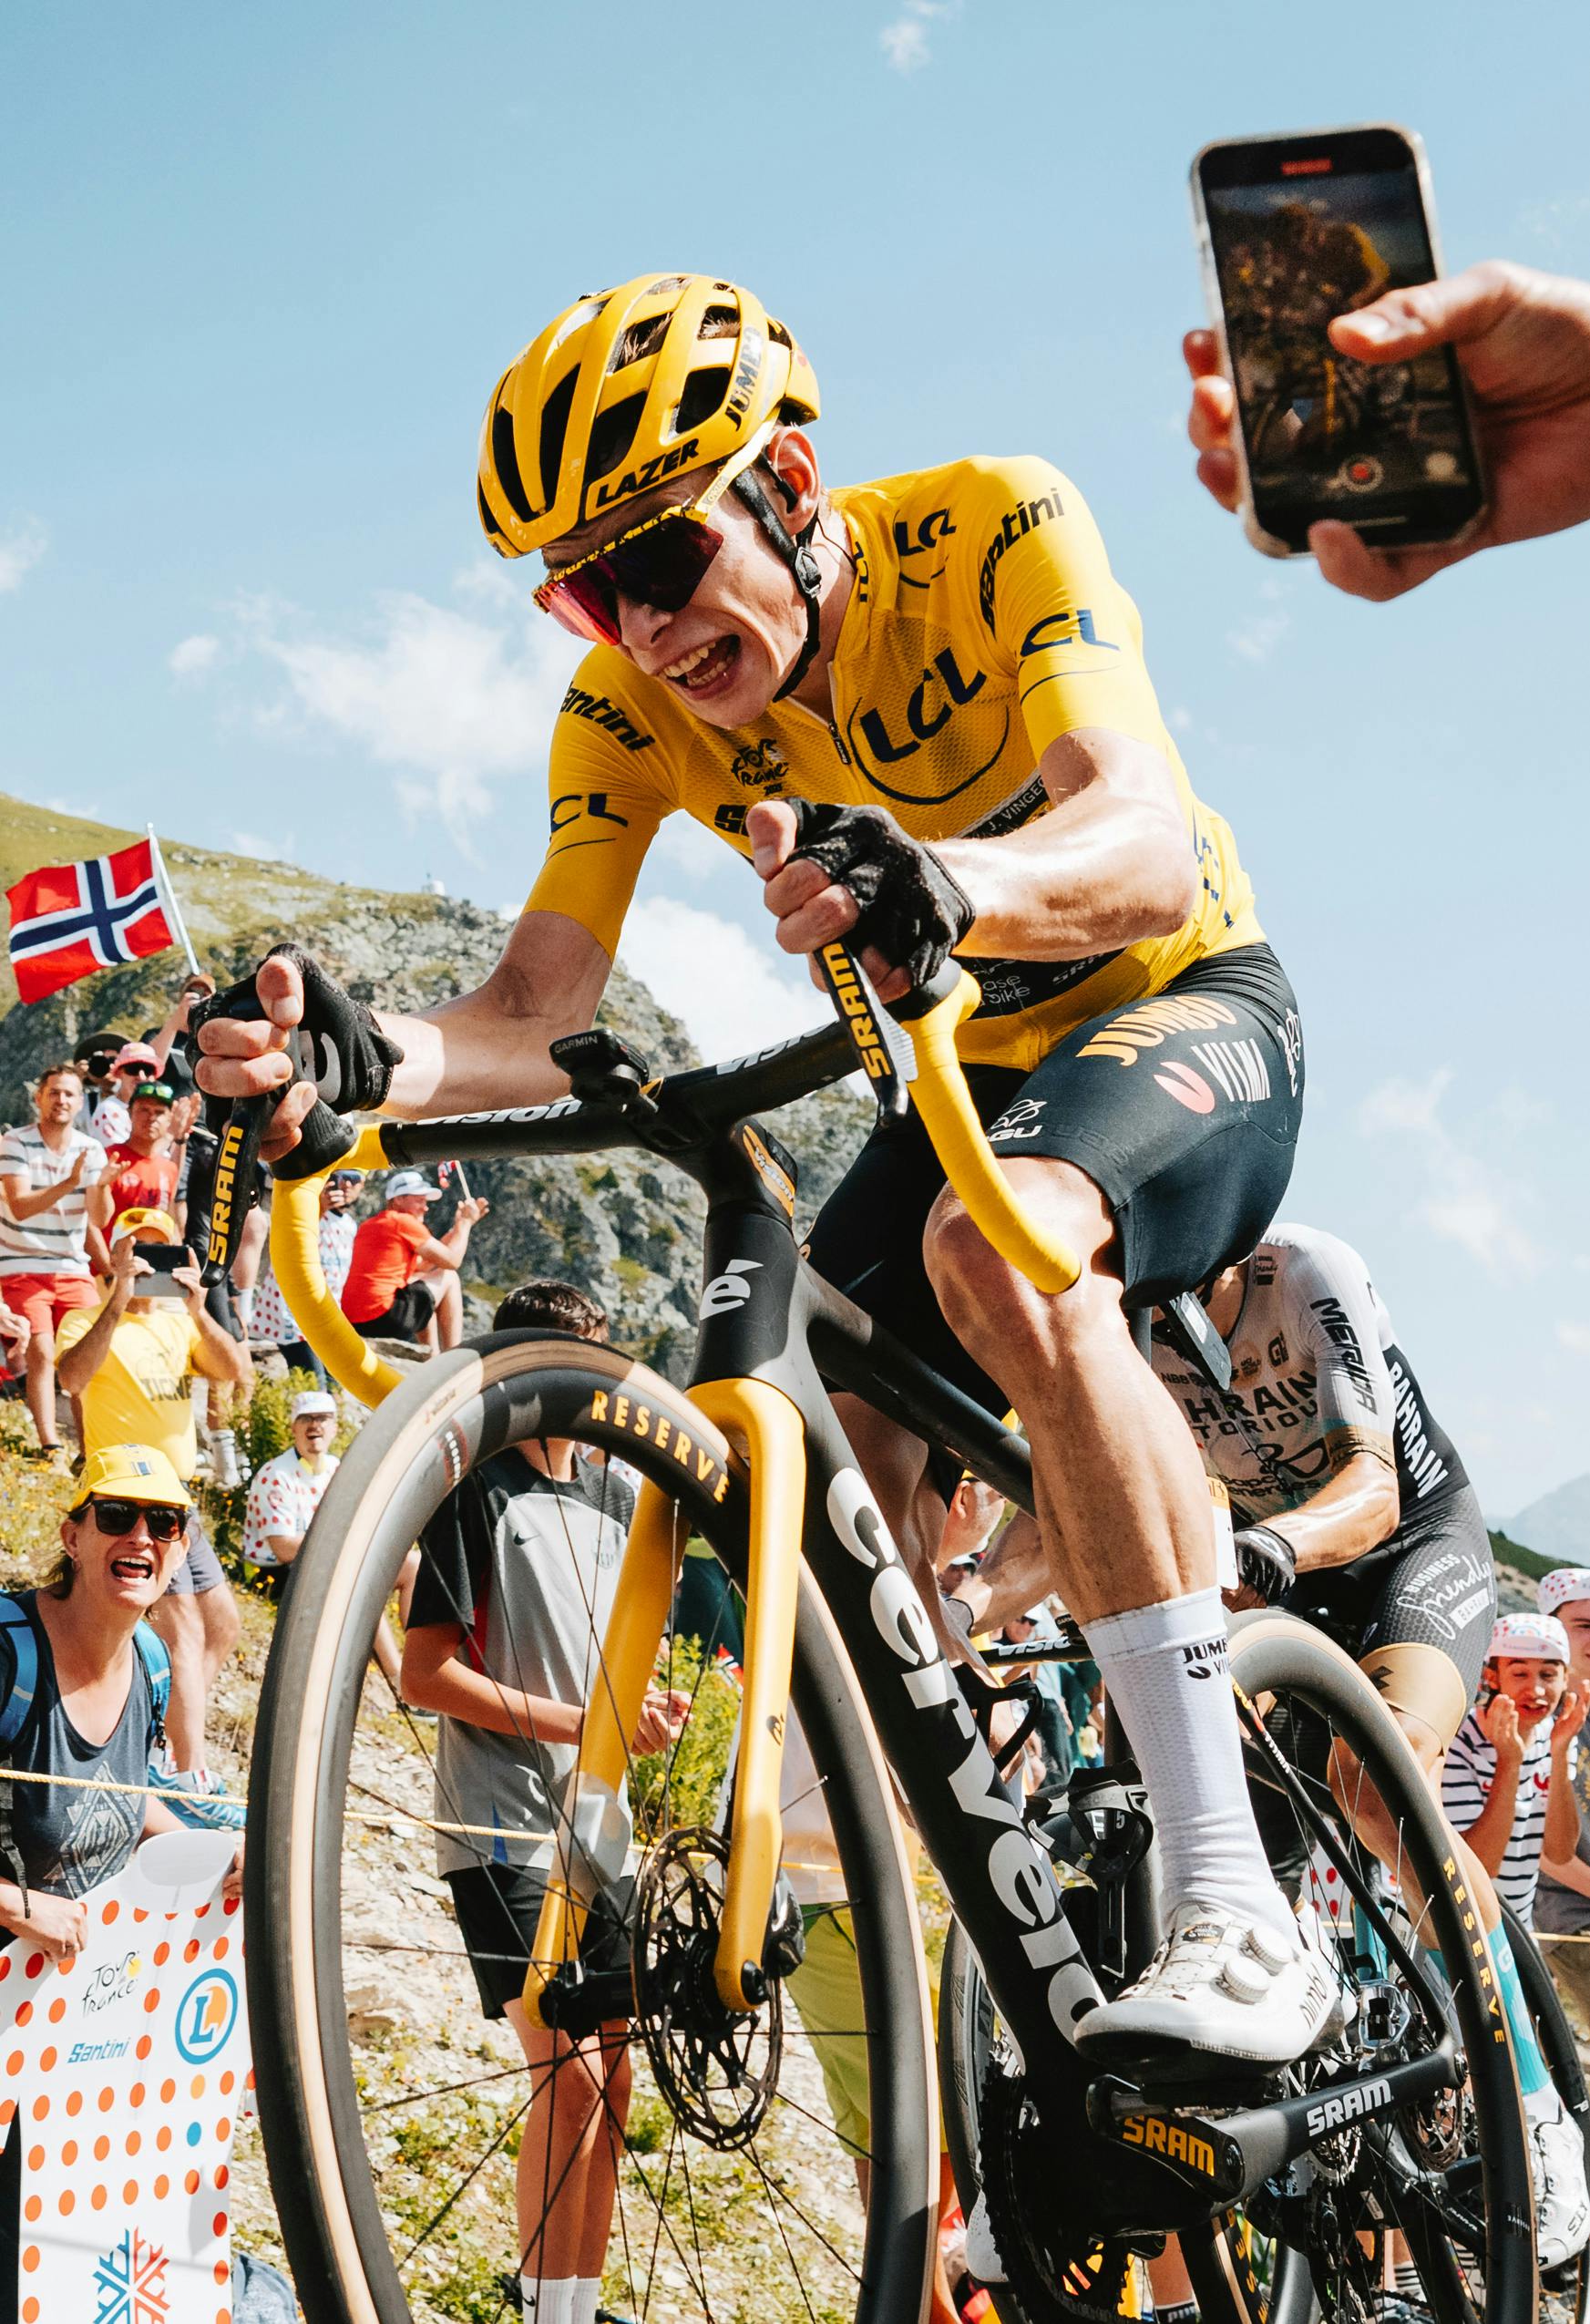 Jonas Vingegaard racing in the Tour de France wearing yellow and climbing with effort on his Cervélo R5.